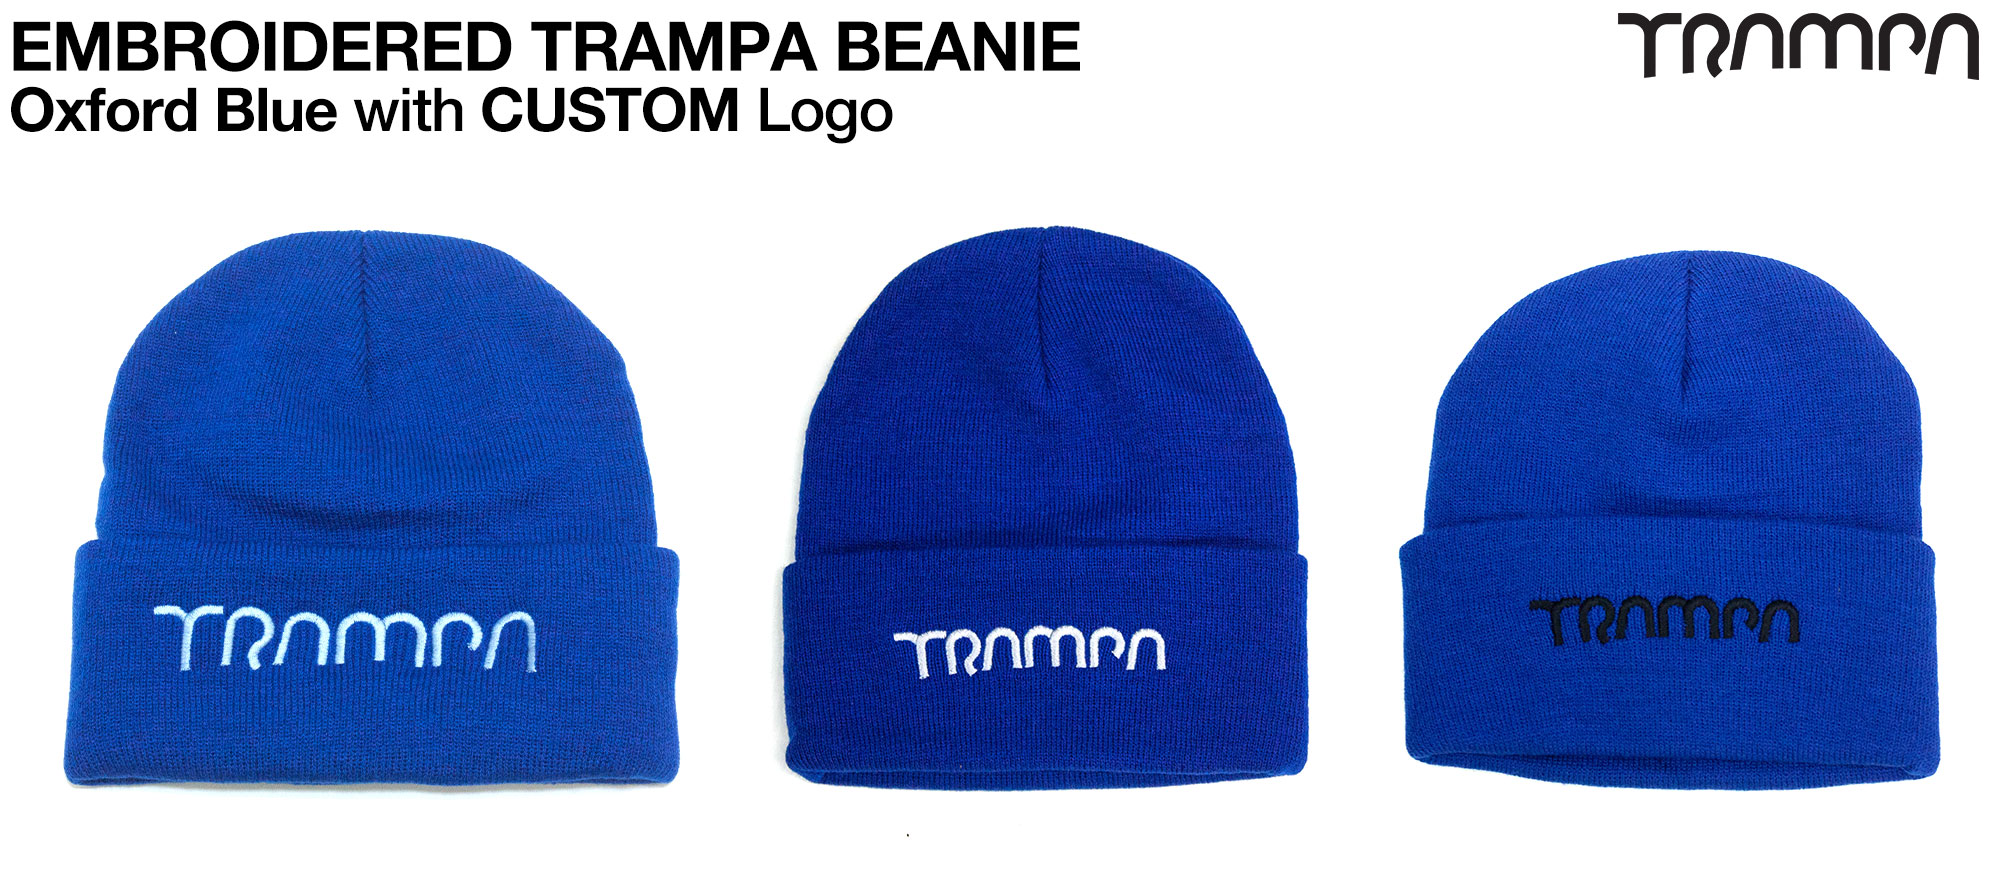 OXFORD BLUE Beanie hat with EMBROIDERED TRAMPA logo  (£12.50)